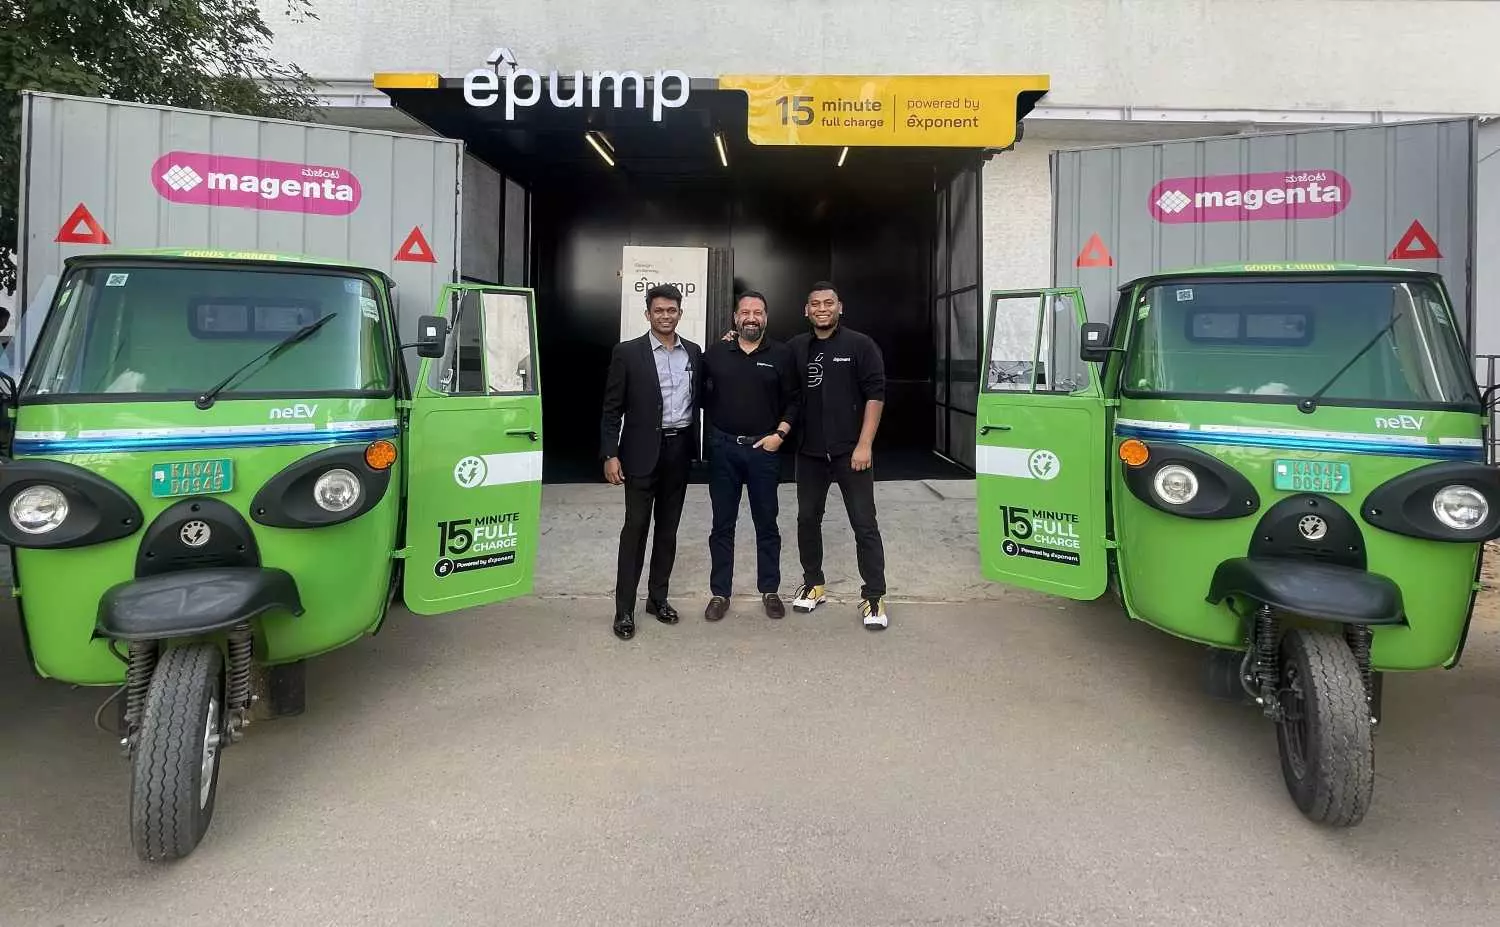 Magenta Mobility, Altigreen & Exponent partner to  roll out 15-minute rapid charging EV fleet